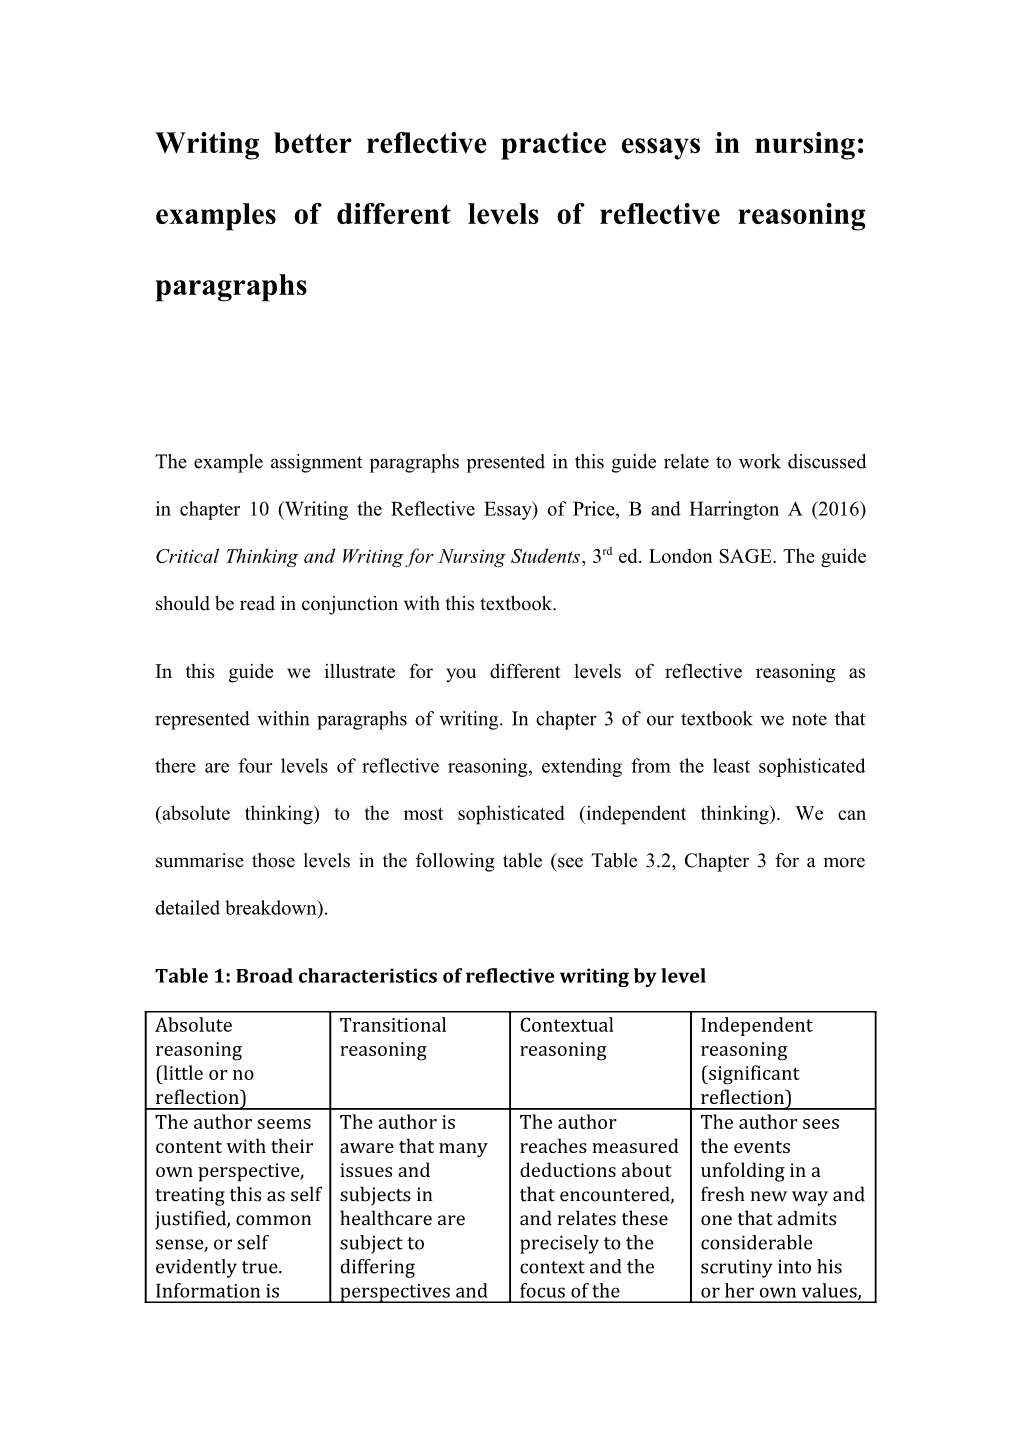 Writing Better Reflective Practice Essays in Nursing: Examples of Different Levels Of